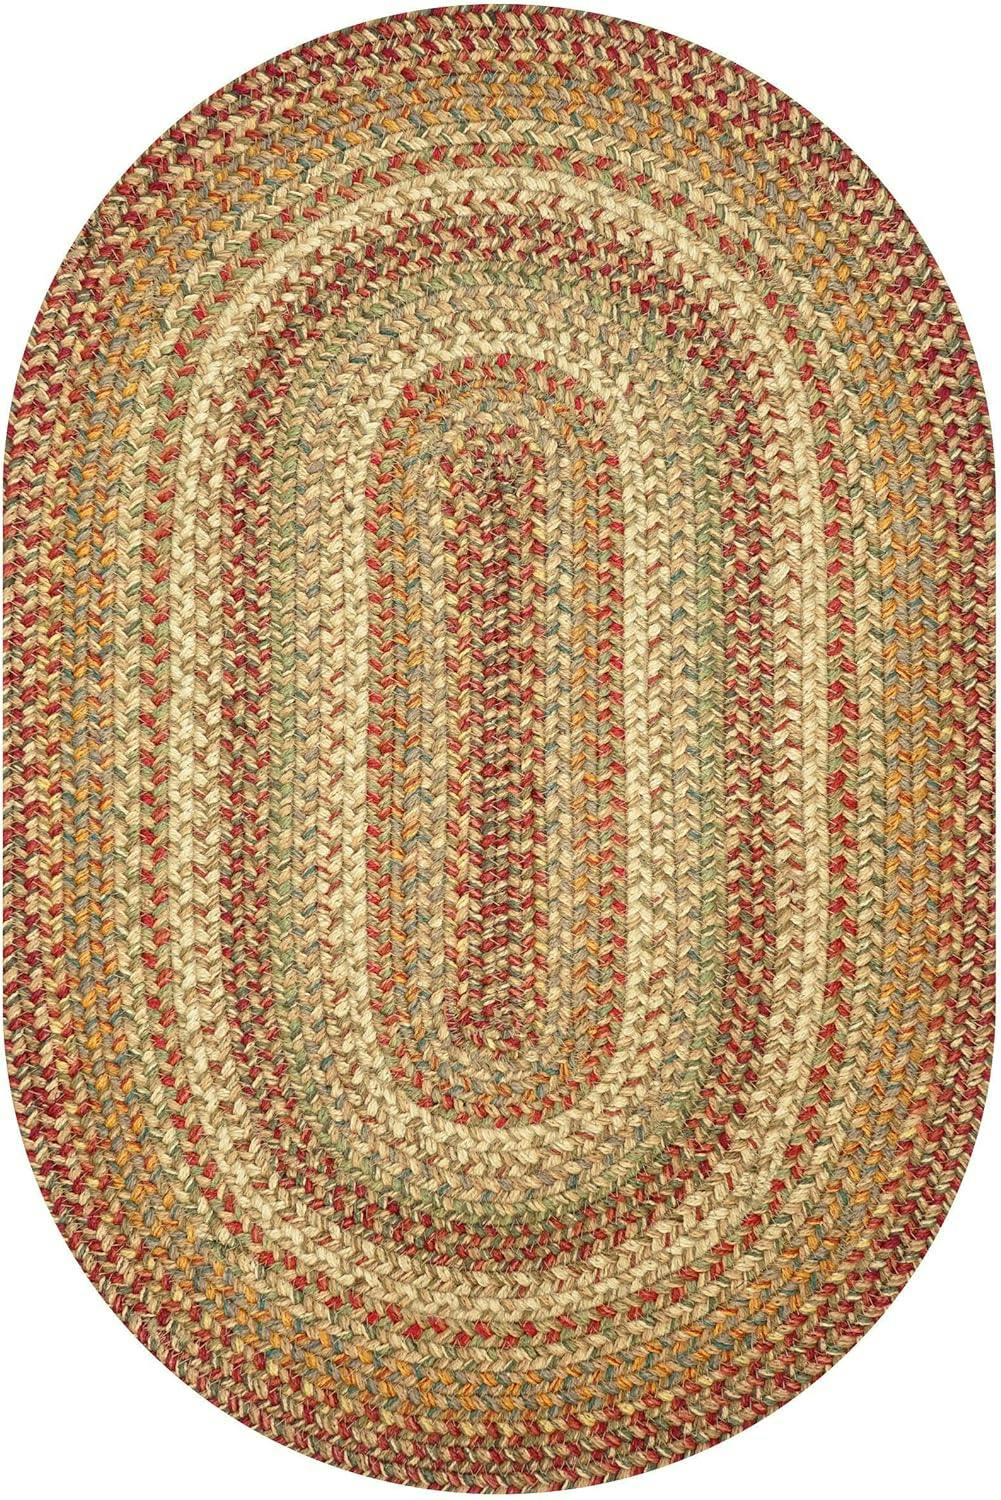 Harvest Oval Braided 20" x 30" Rug in Tan, Beige, and Gold Wool Blend